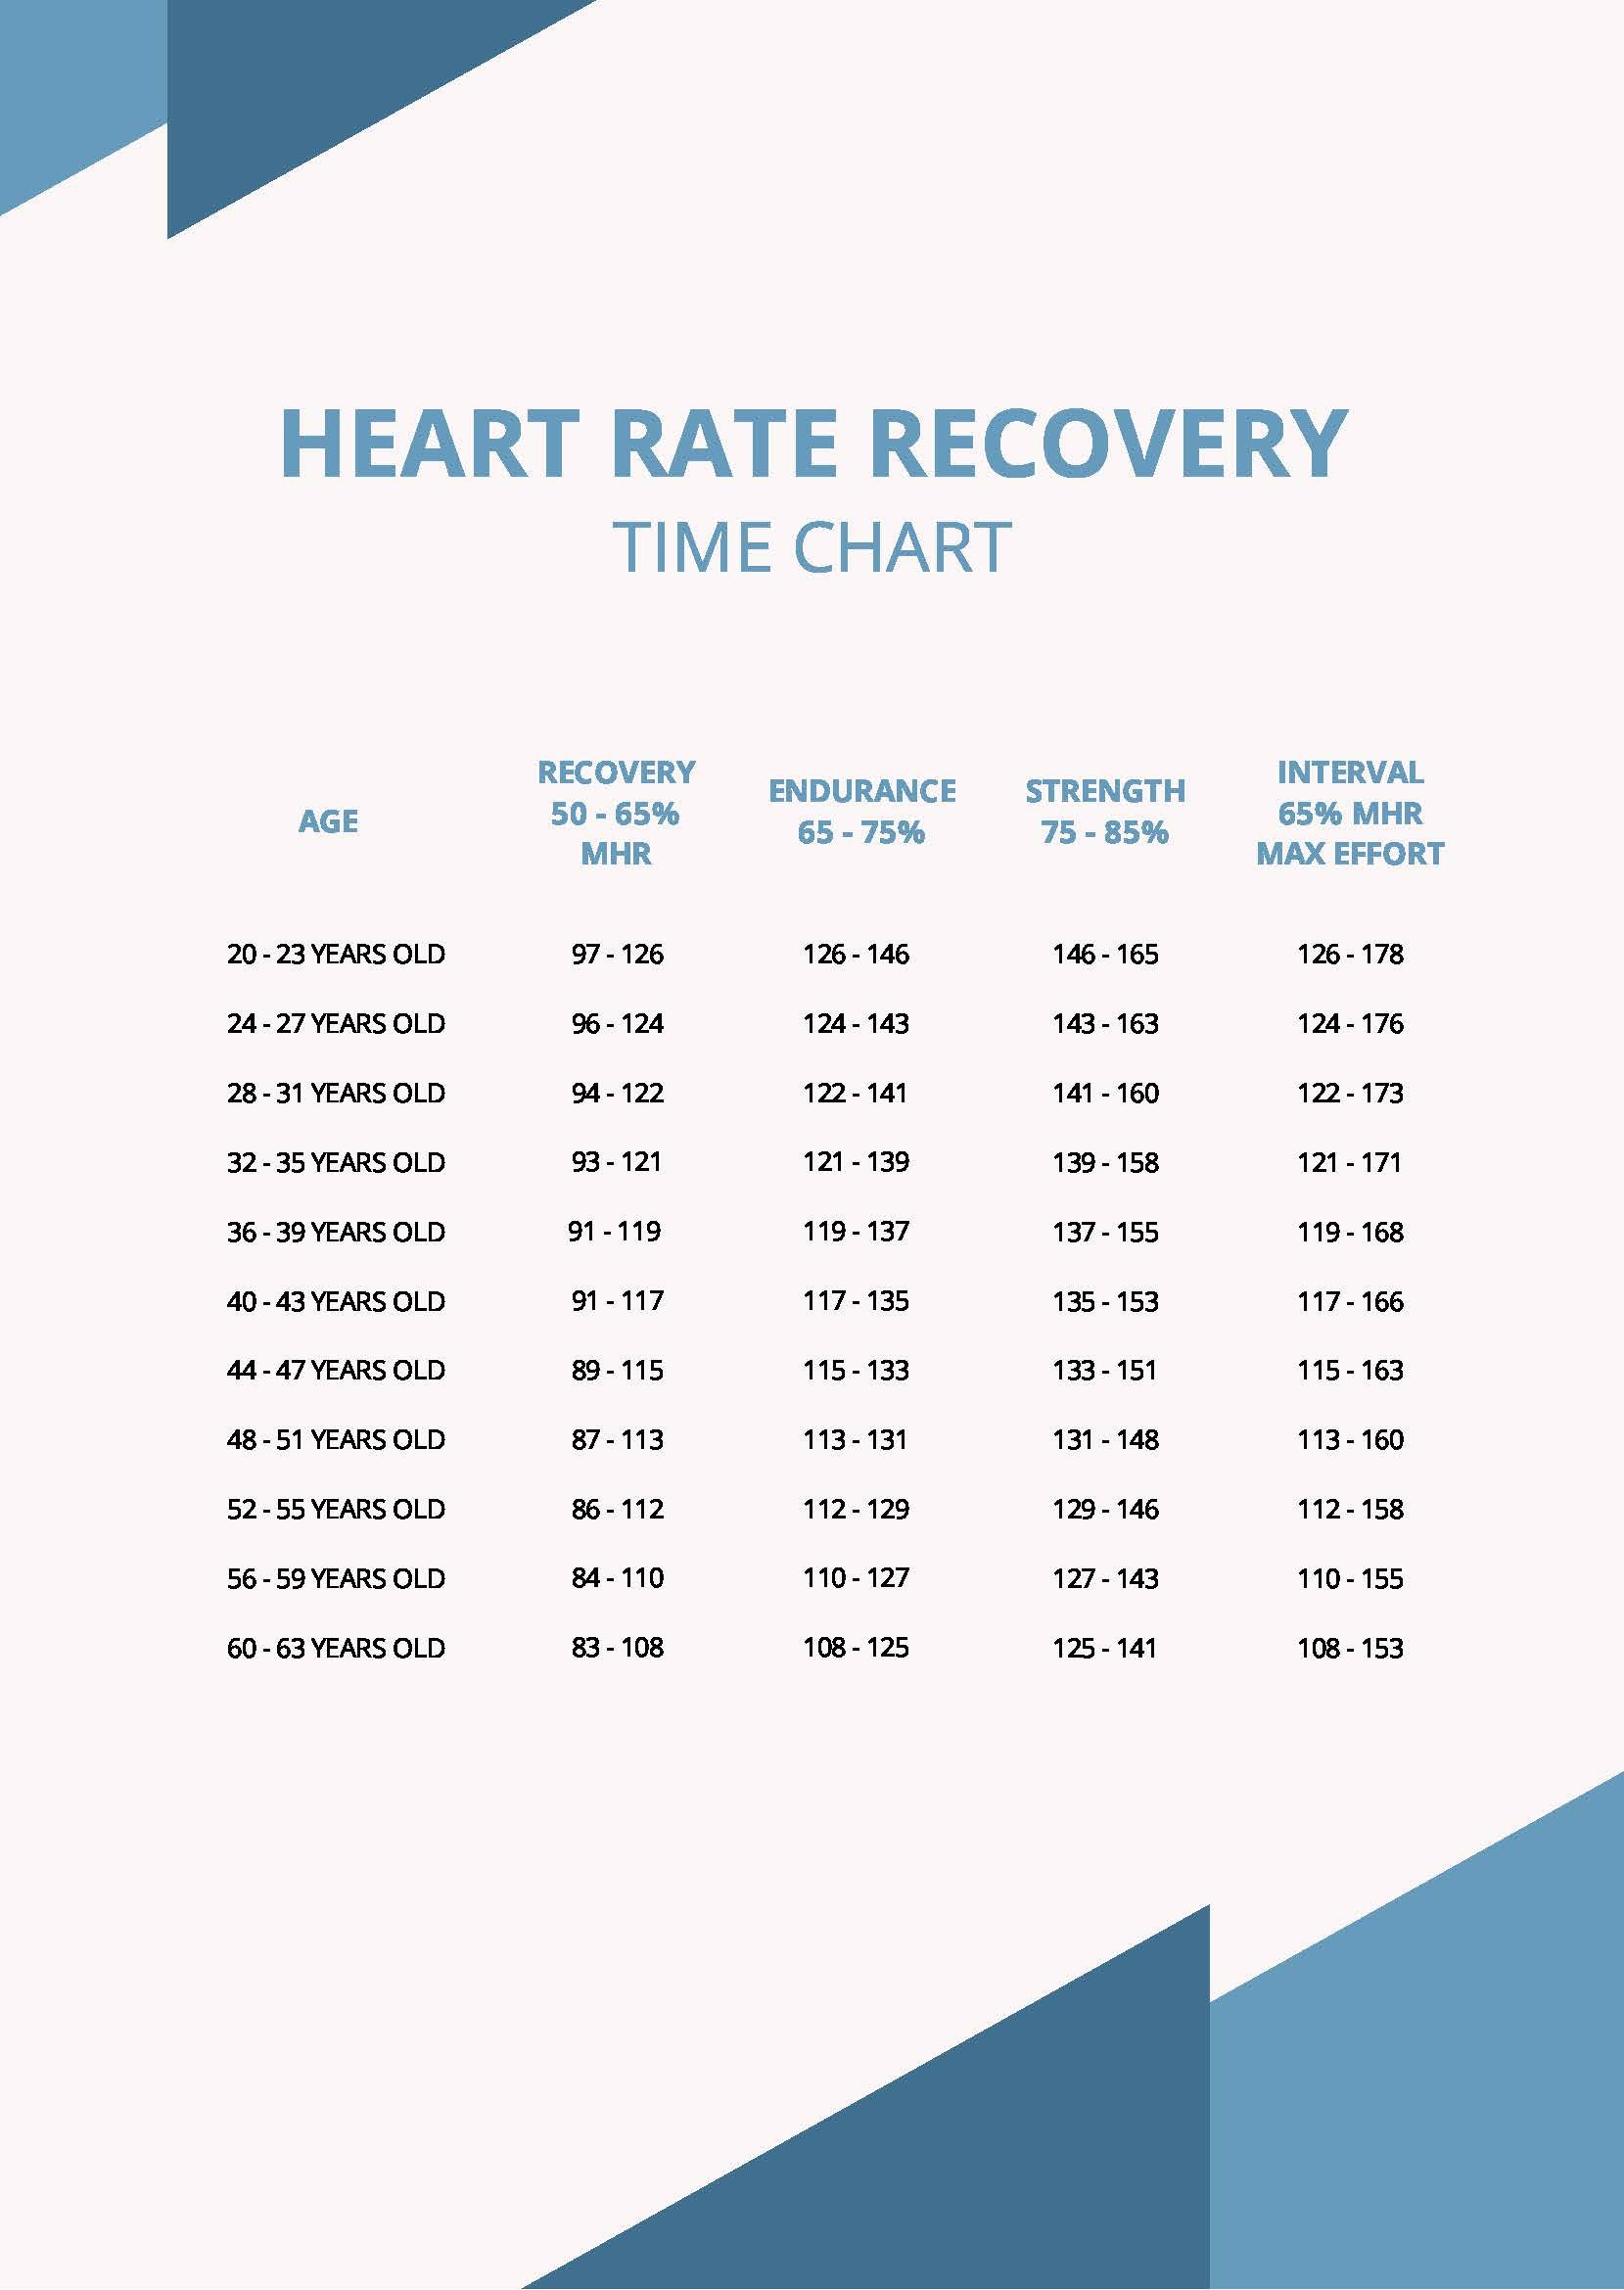 Heart Rate Recovery Time Chart in PDF